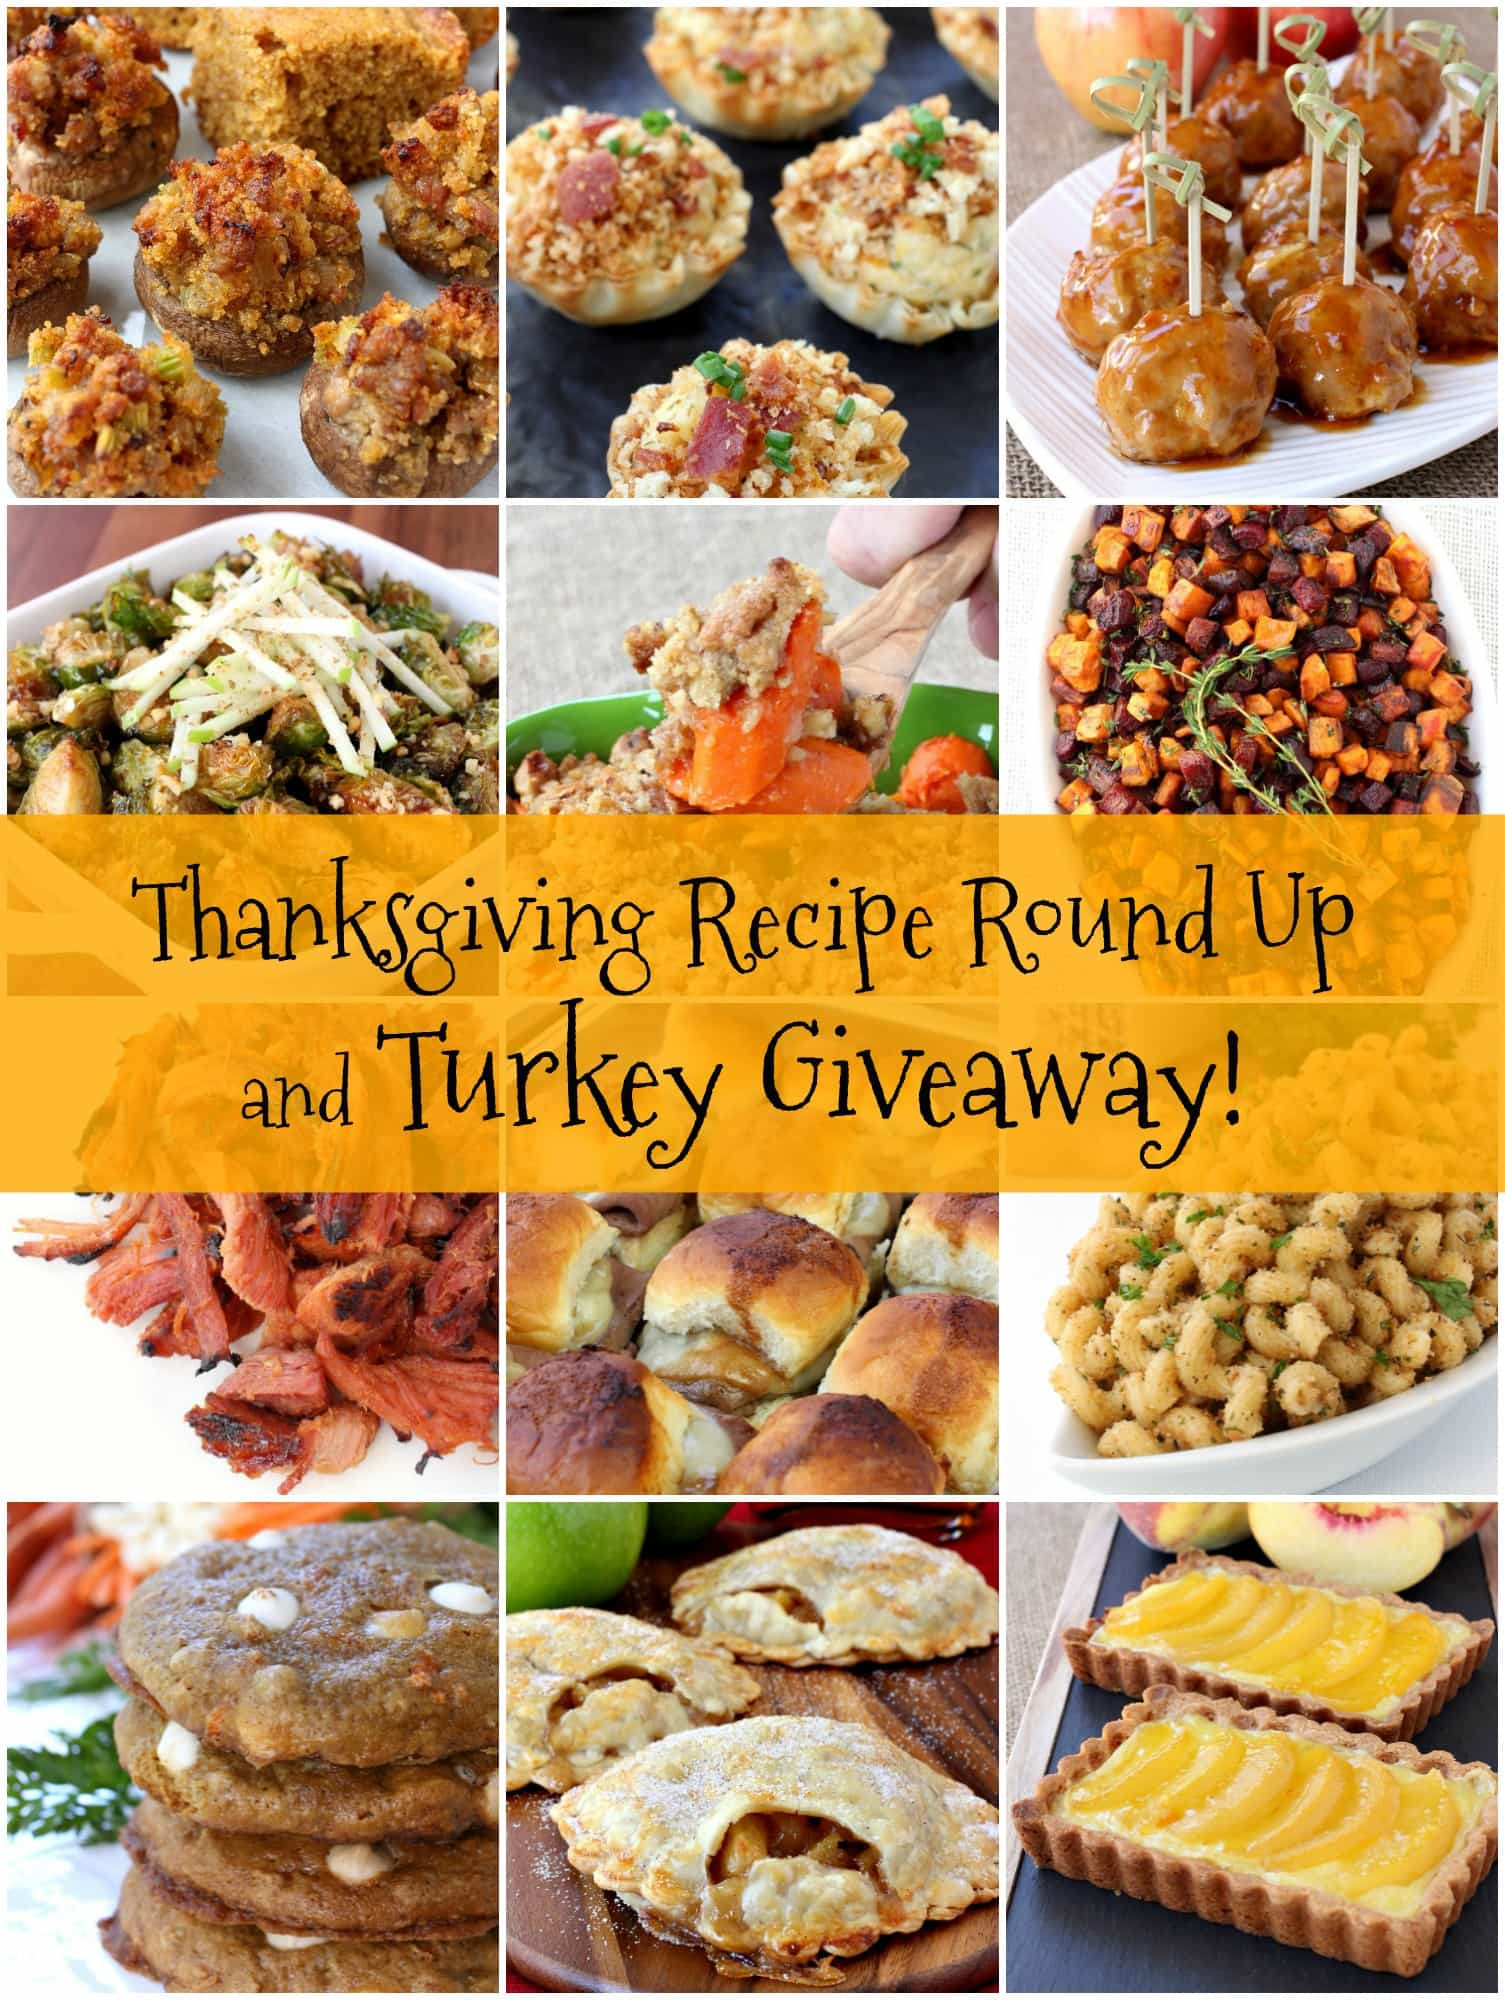 Thanksgiving Turkey Giveaway
 Thanksgiving Recipe Round Up and Turkey Giveaway